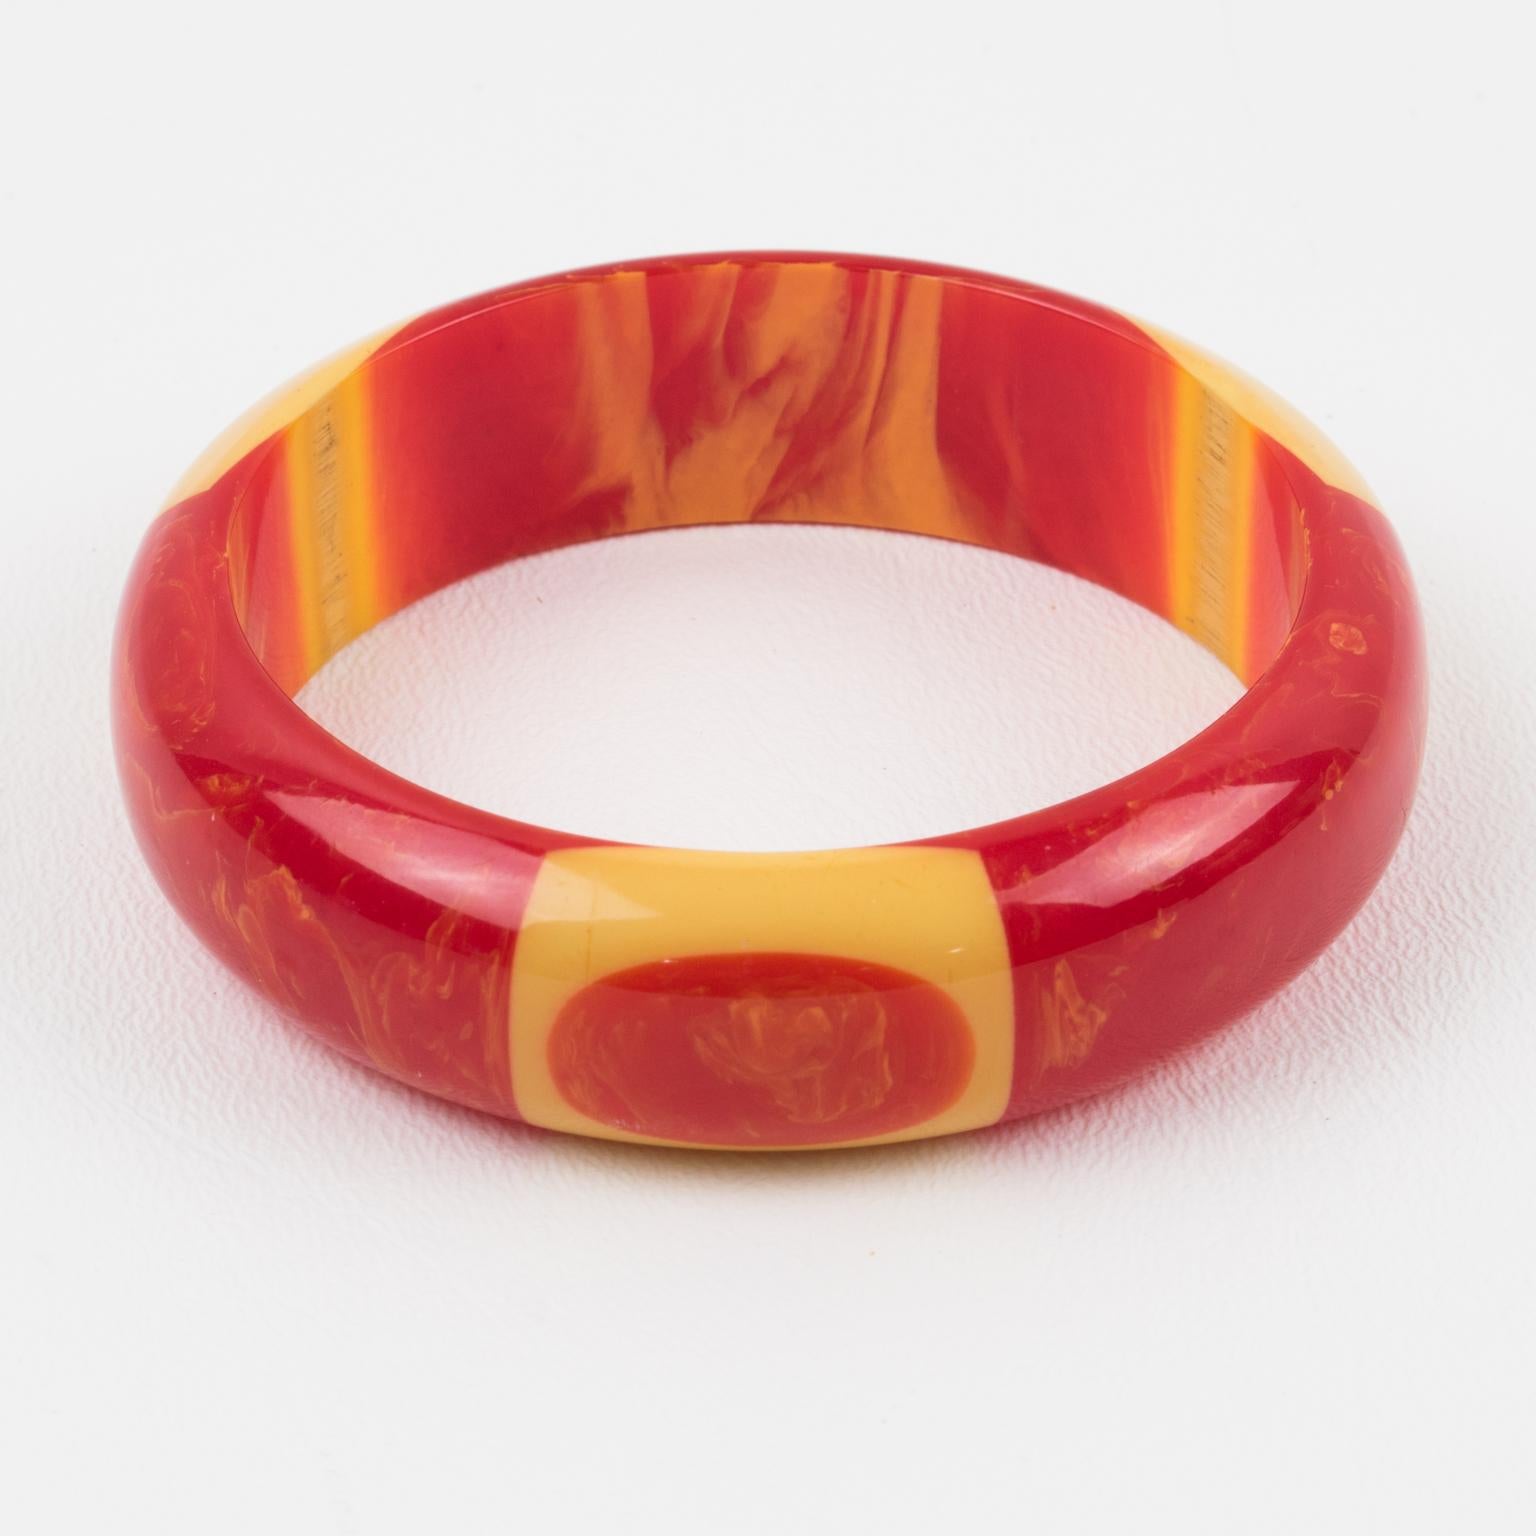 Bakelite Bangle Bracelet | Marbled Brown with 6 Yellow Dots